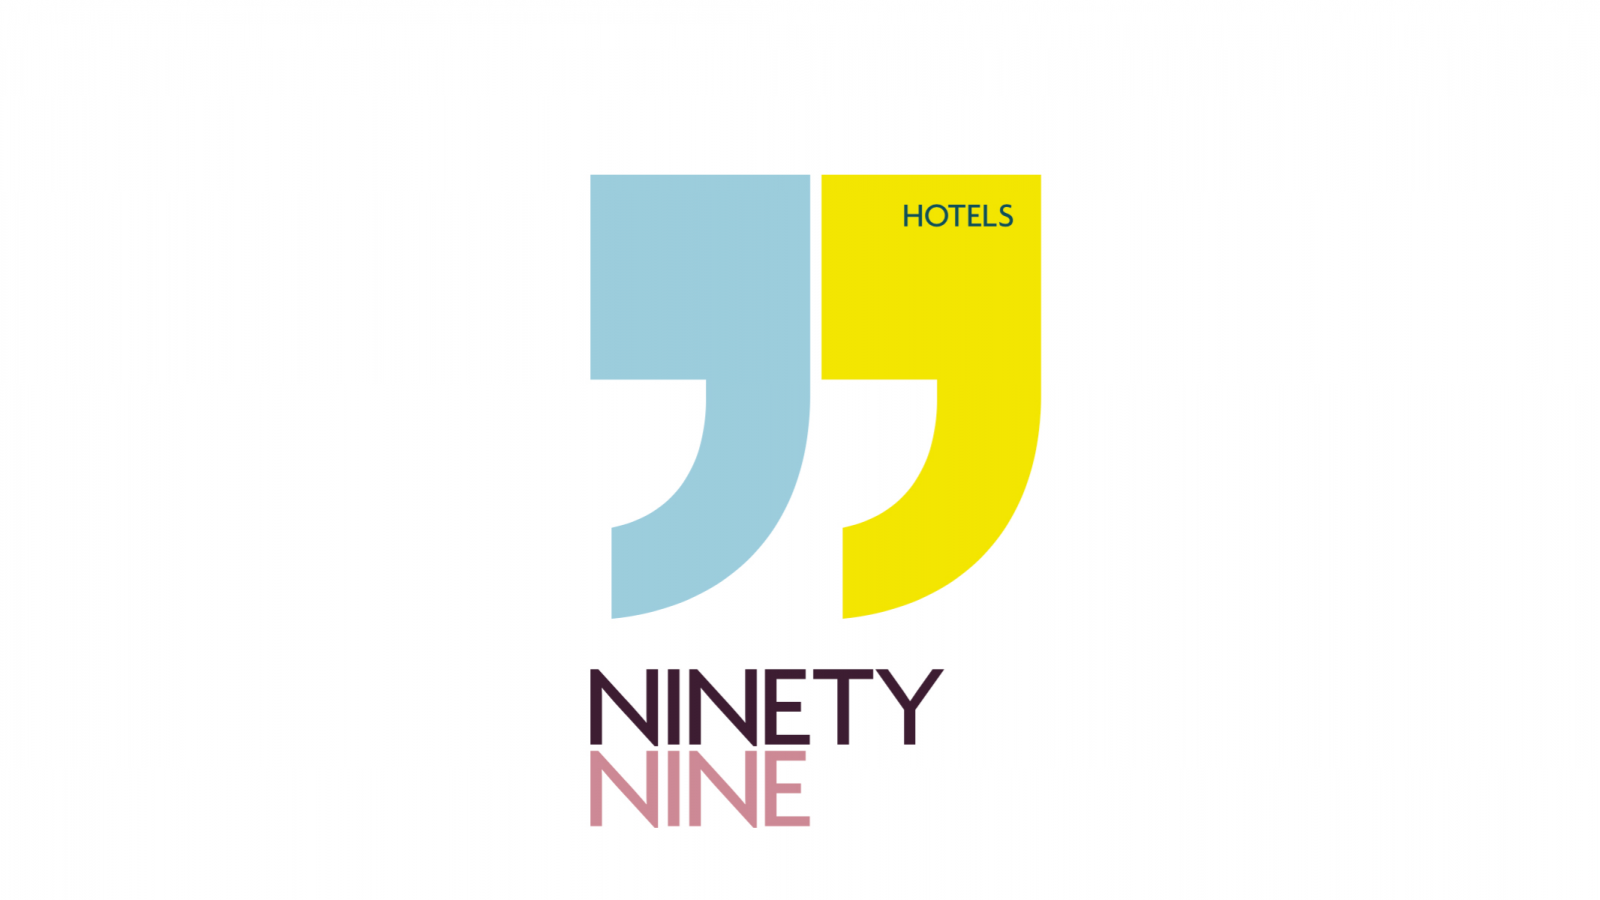 Centro Hotel Group has launched the new "99" hotel brand